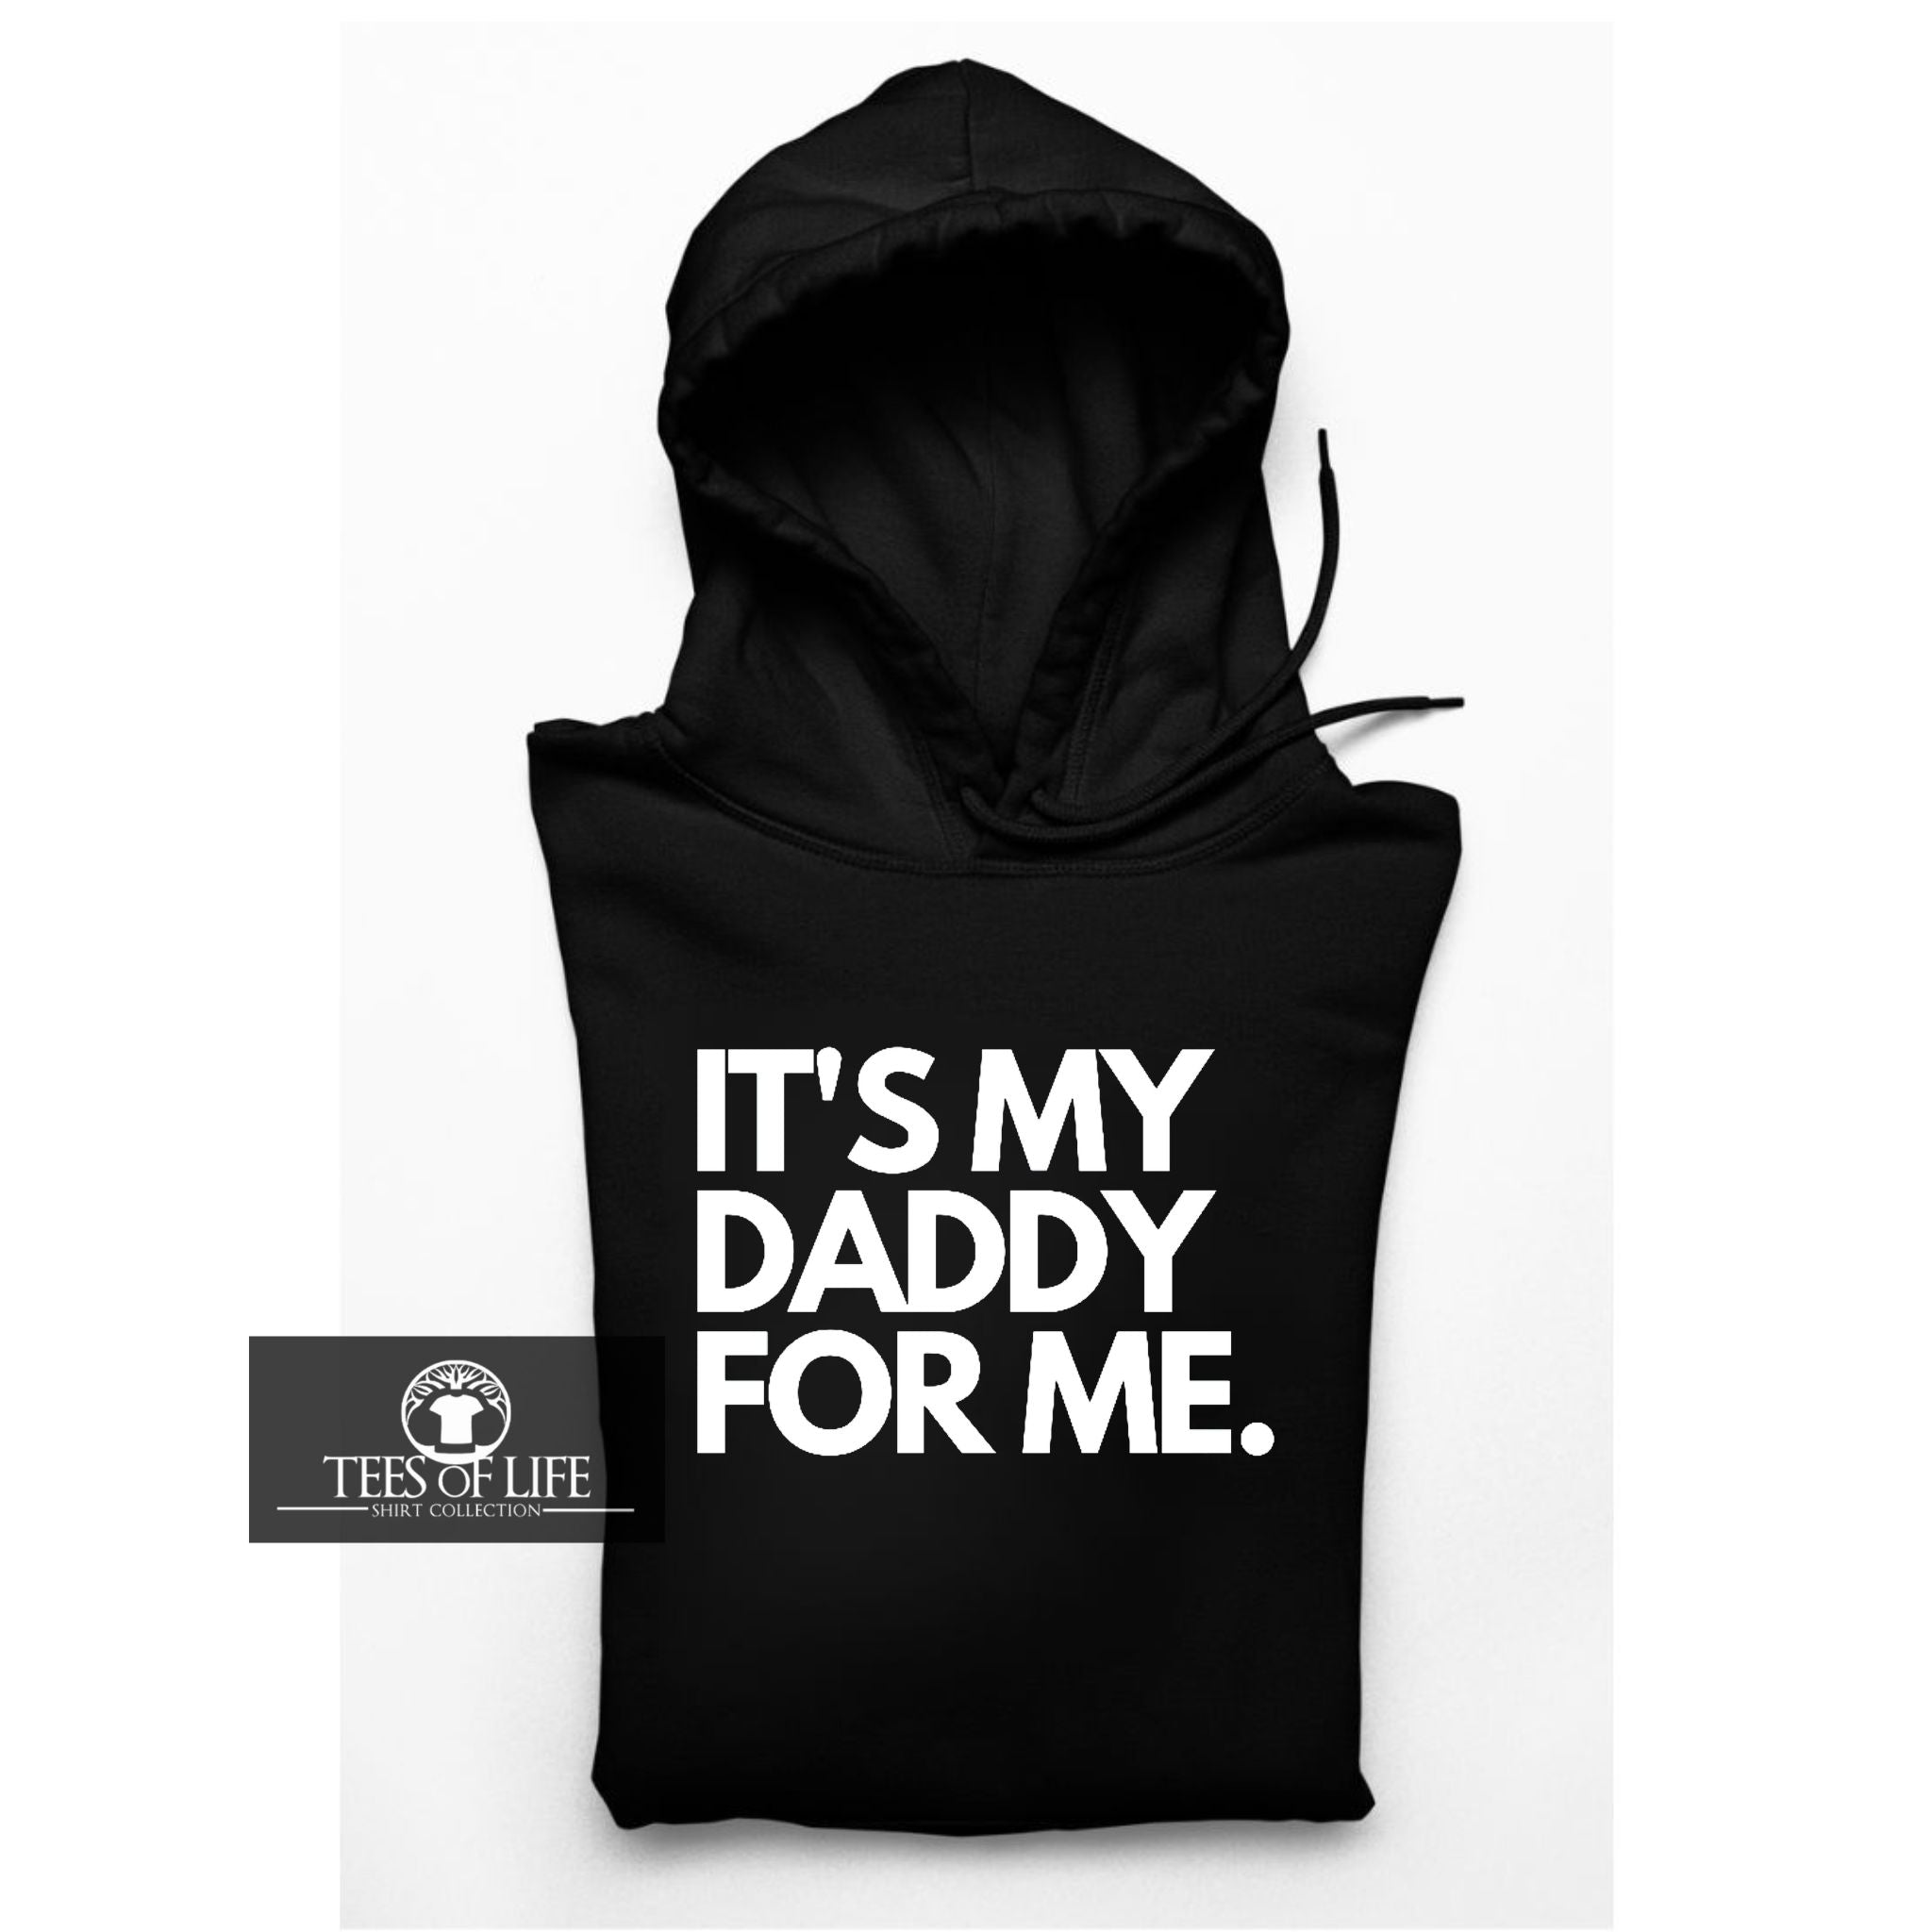 It's My Daddy For Me Adult Unisex Hoodie